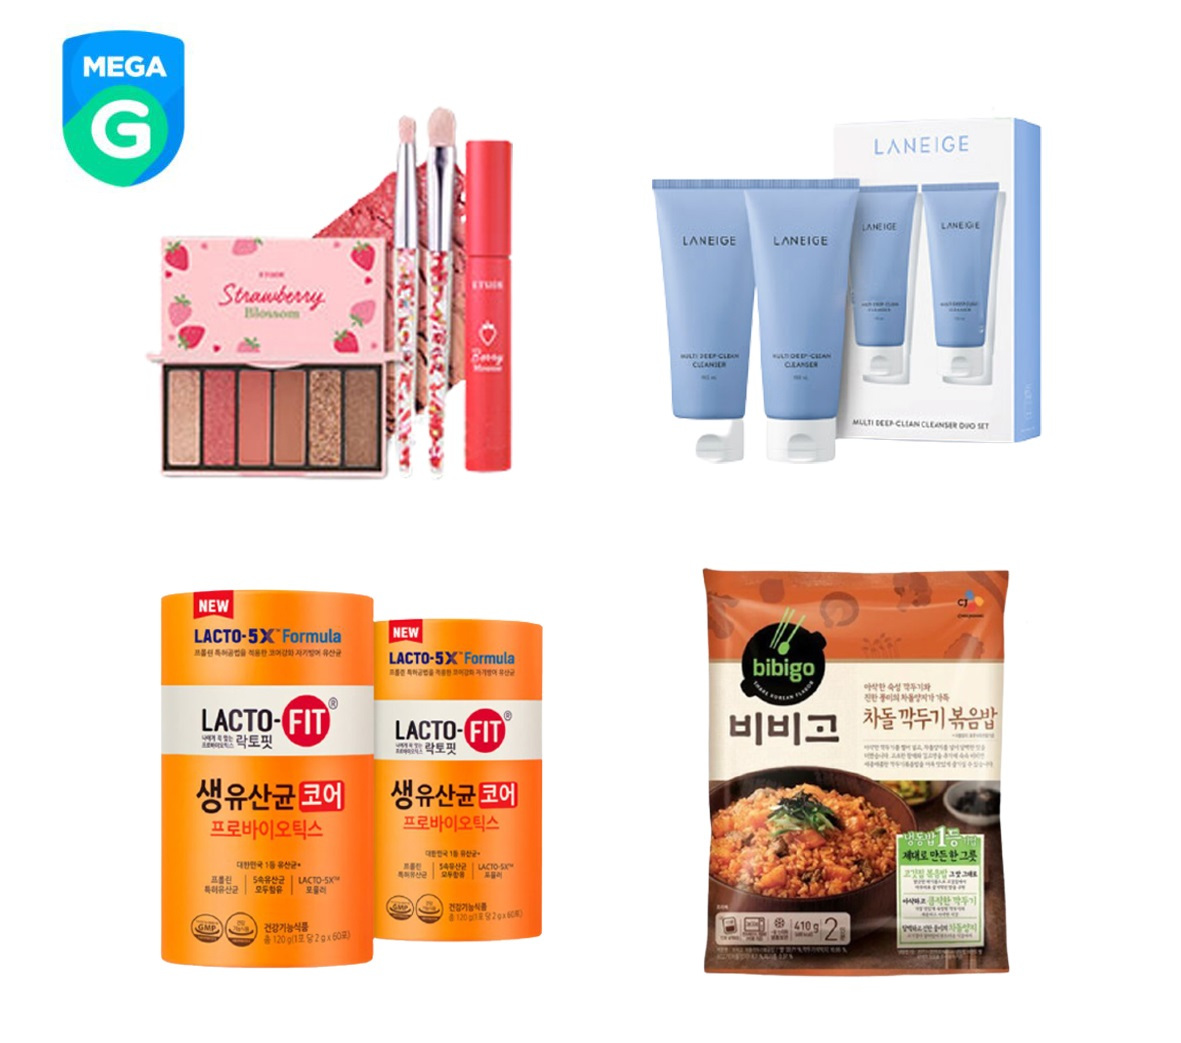 This image provided by Gmarket shows hit products from its Mega G-Festival held in the run-up to the Chuseok holiday season.